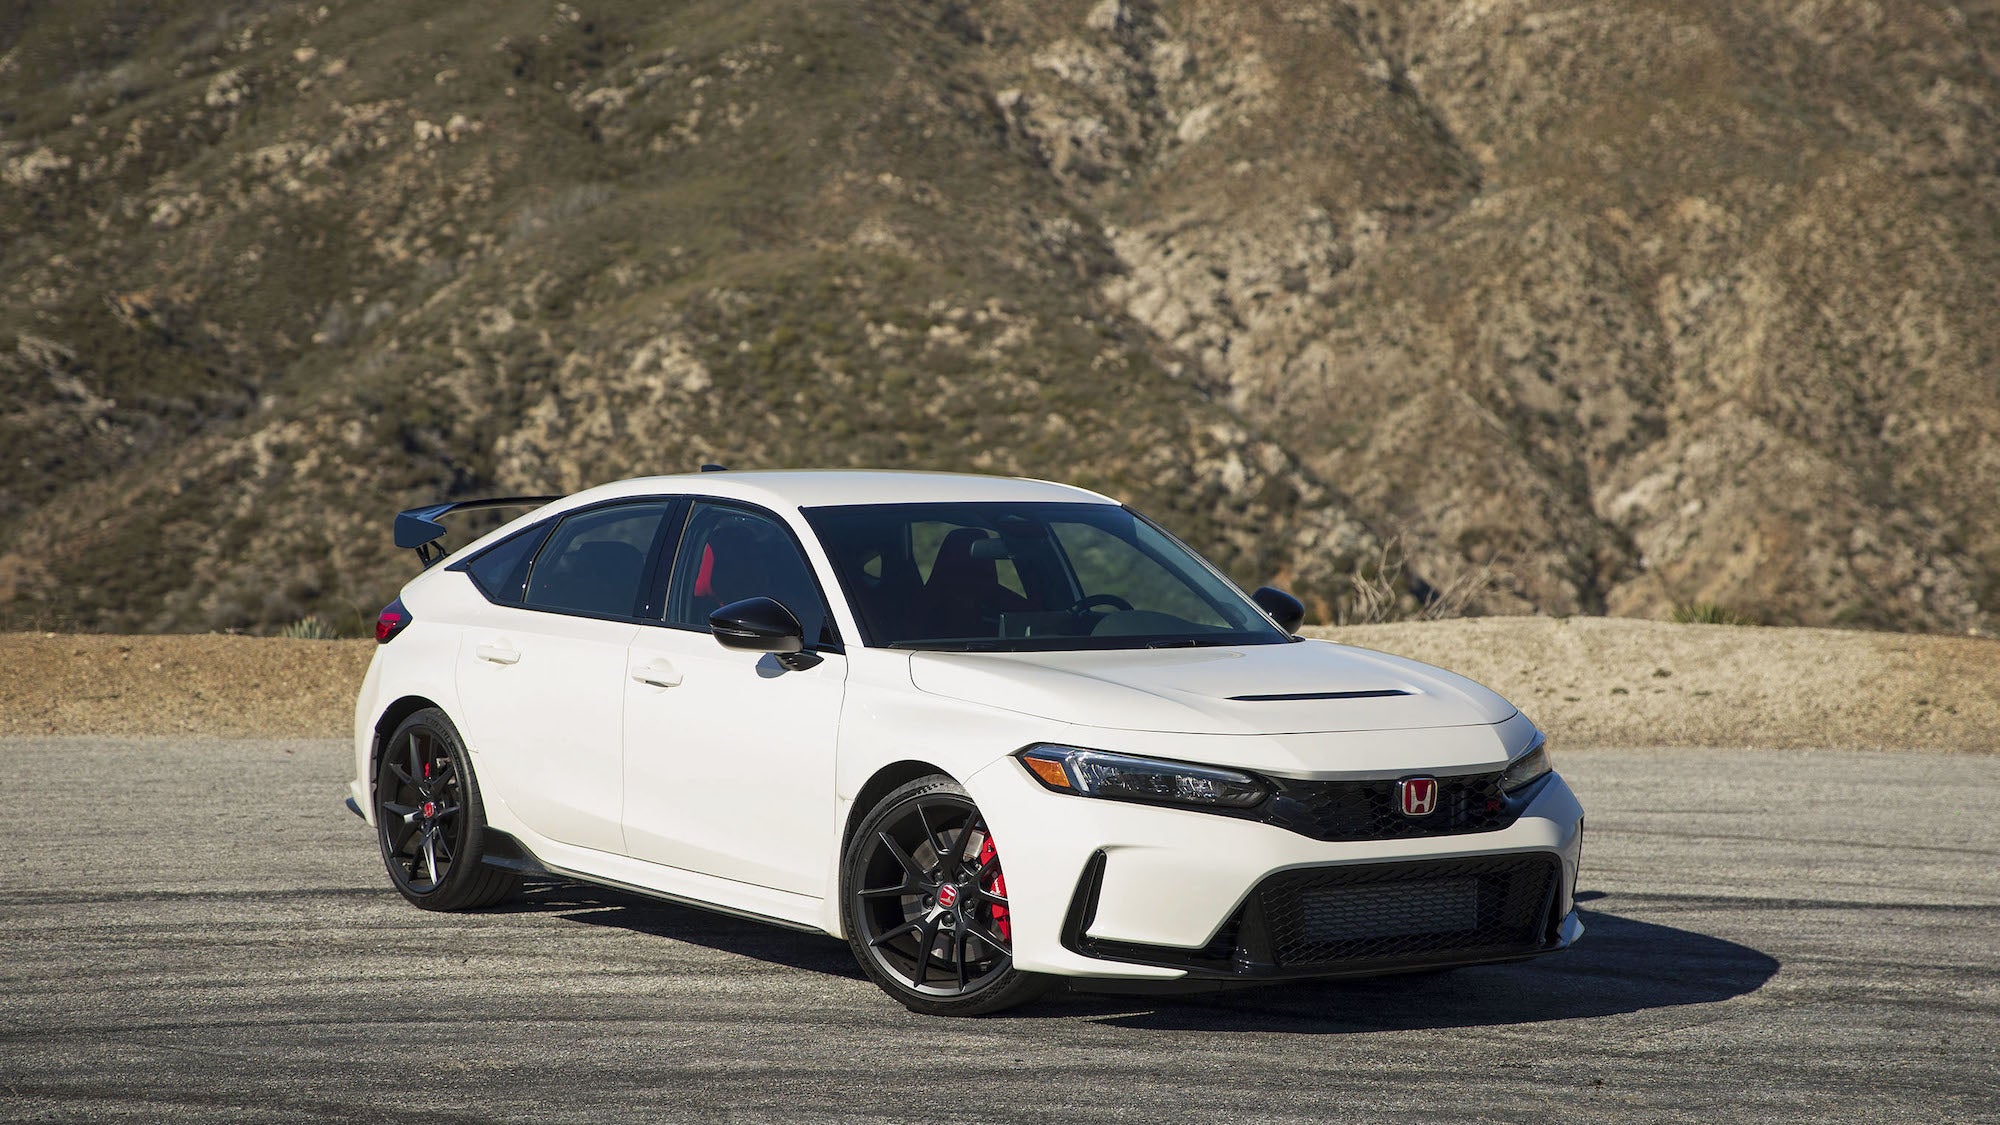 2023 Honda Civic Type R Review: Anything But Ordinary